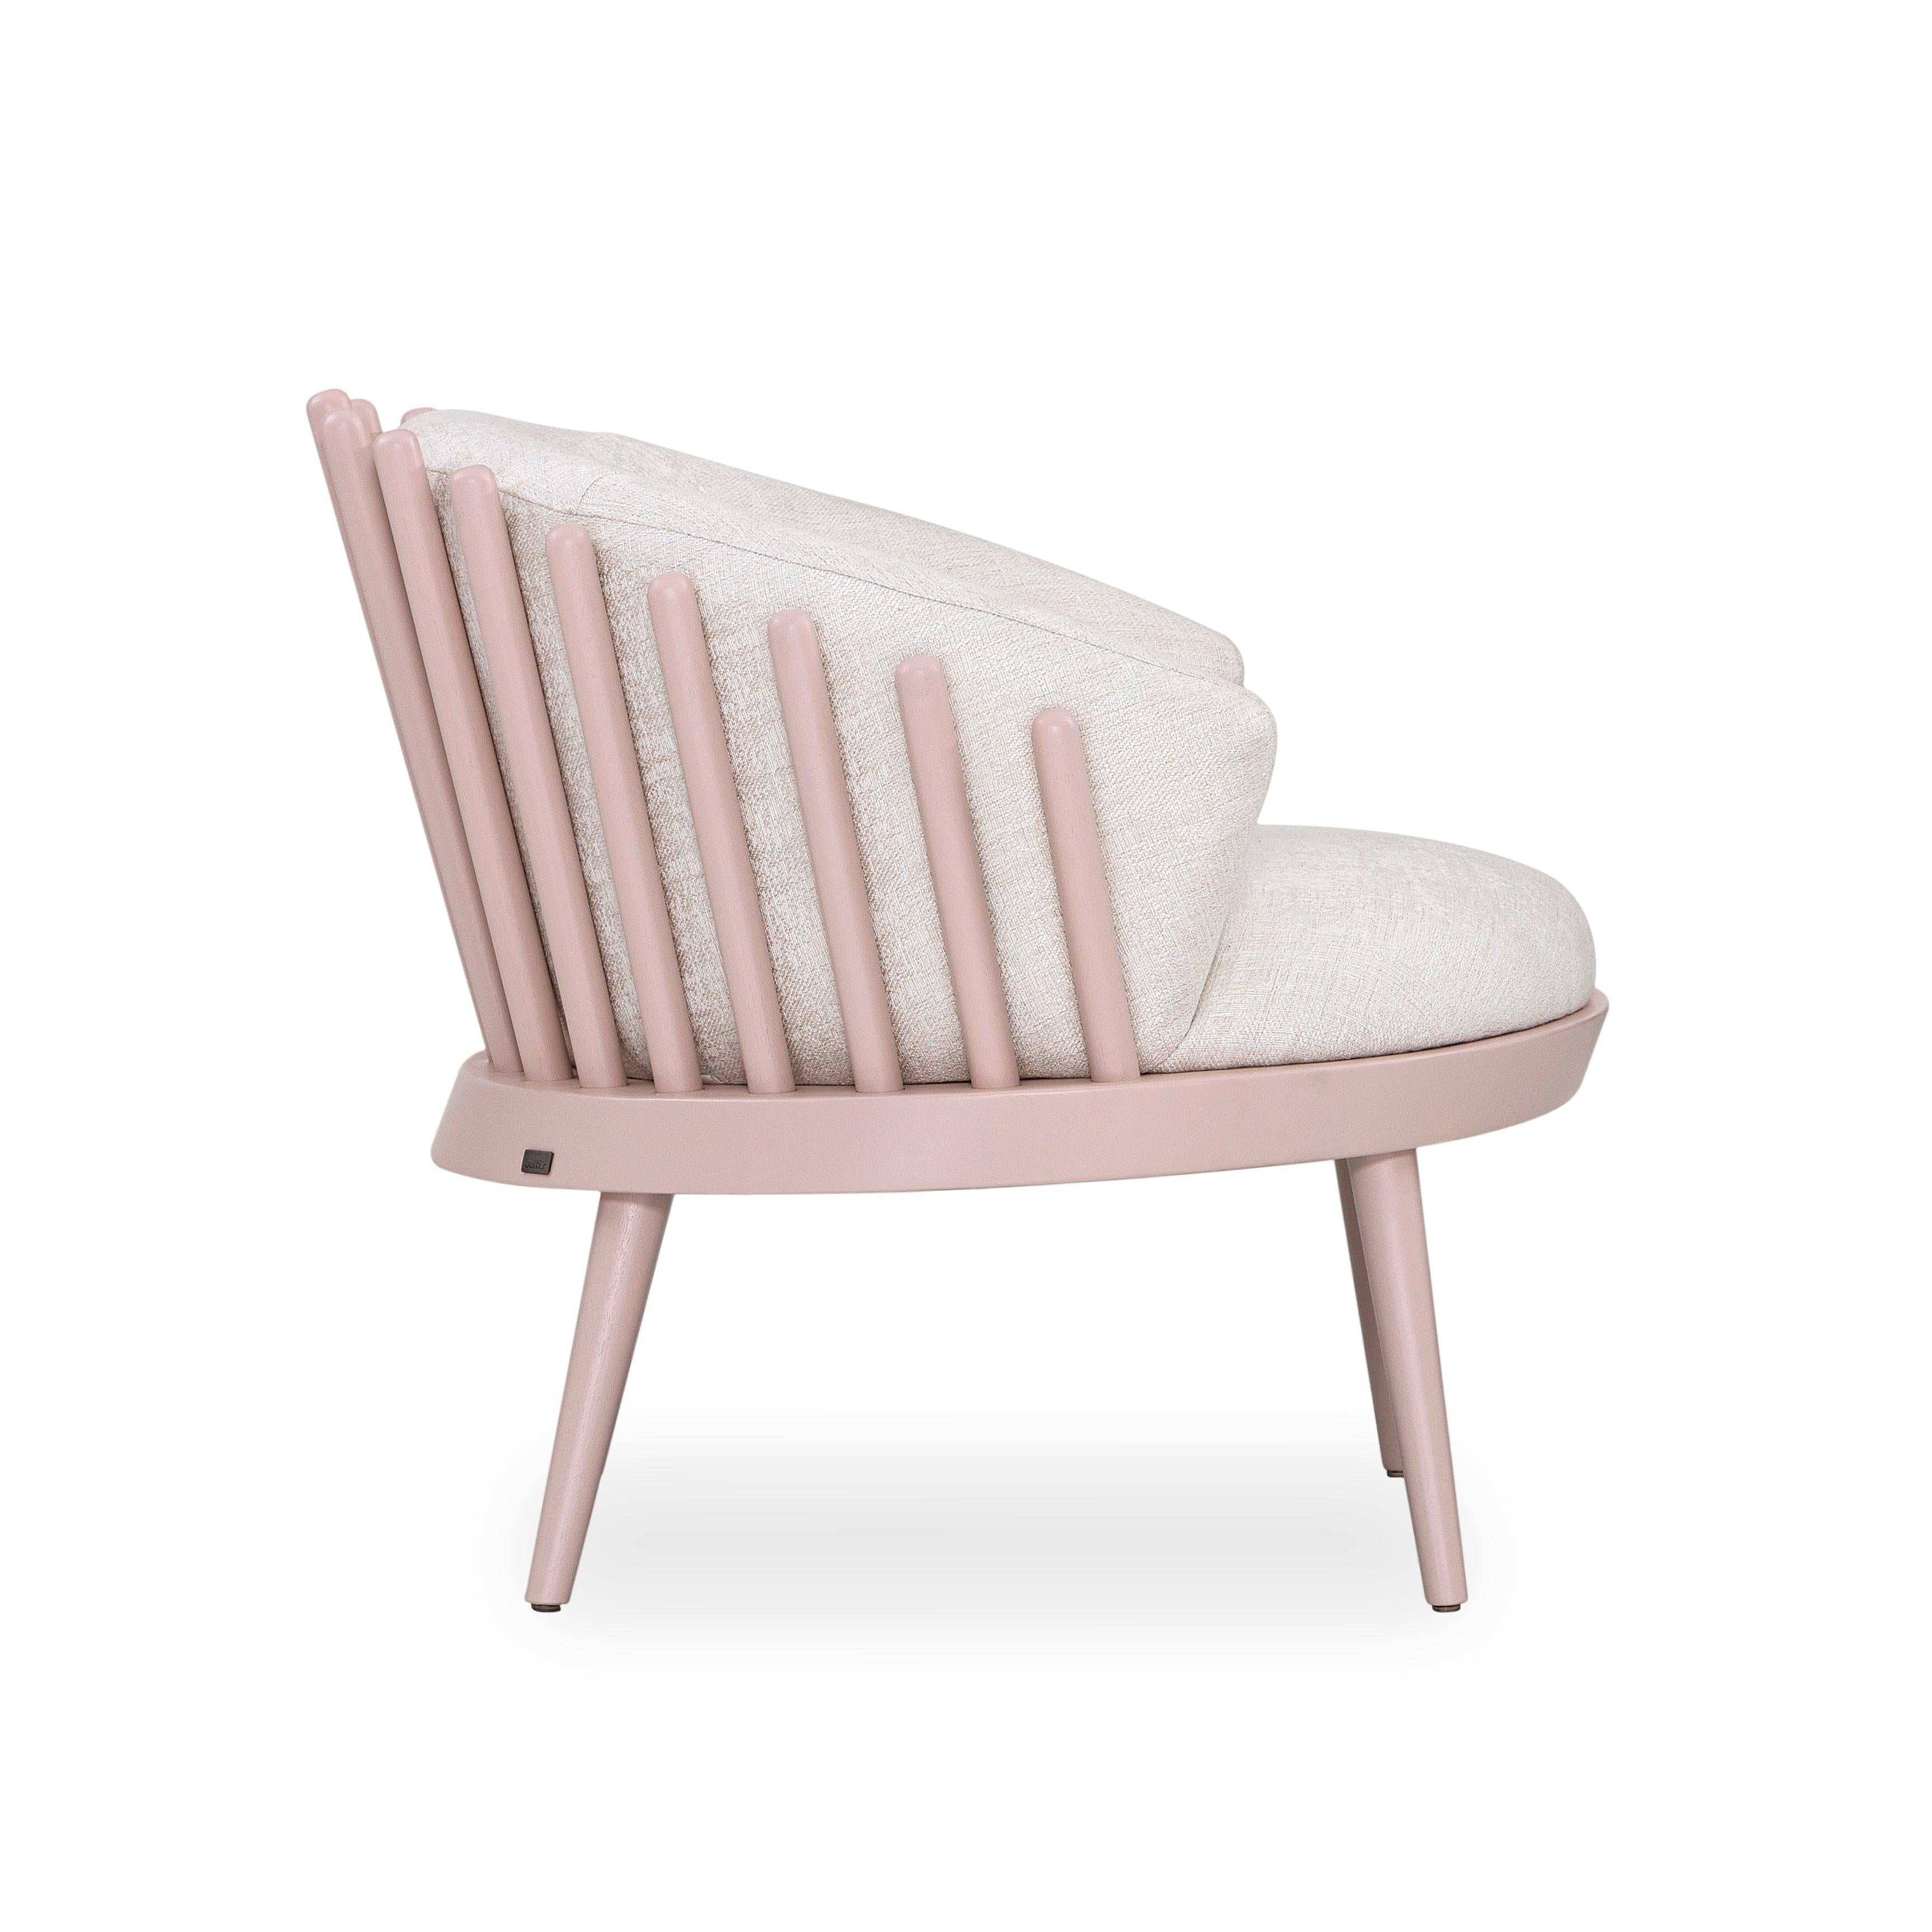 The Uultis design team has created this beautiful Fane armchair, upholstered with a beautiful and soft off-white fabric, feature with a quartz wood finish. This beautiful creation will provide a perfect comfortable space with its cushion seat and